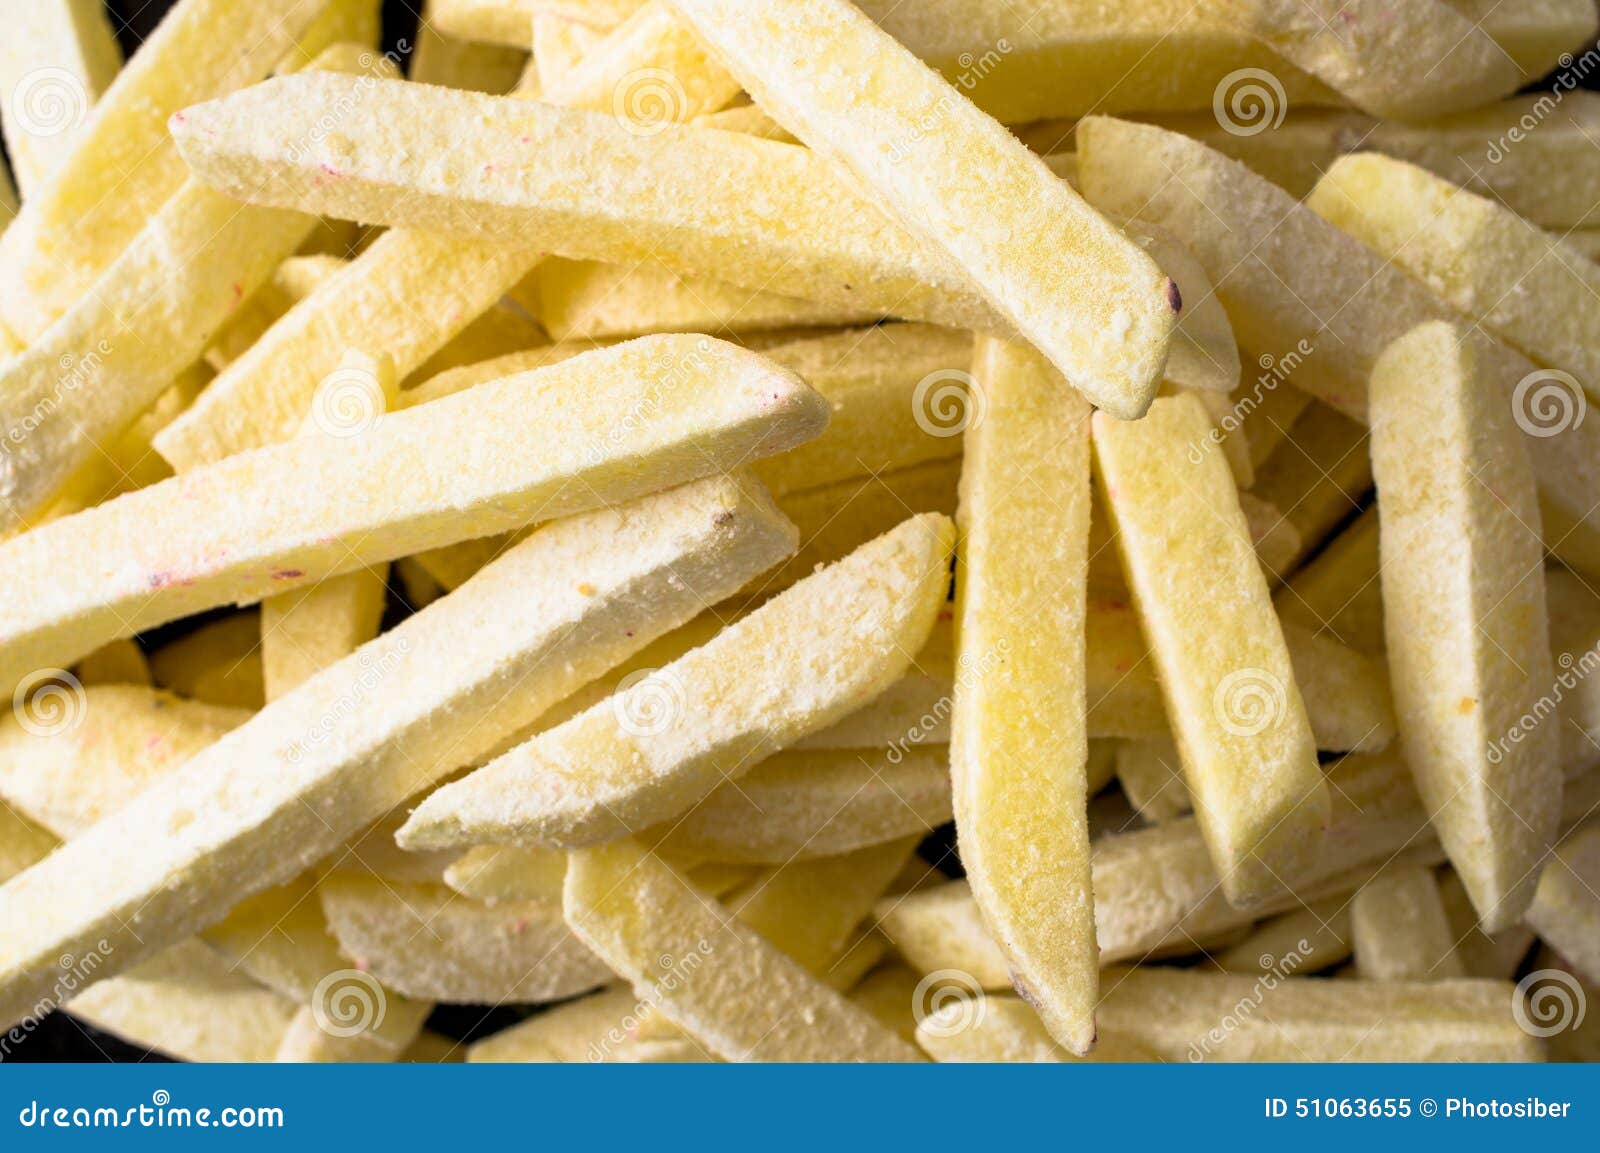 Frozen French fries for. Frozen sliced potatoes for cooking french fries